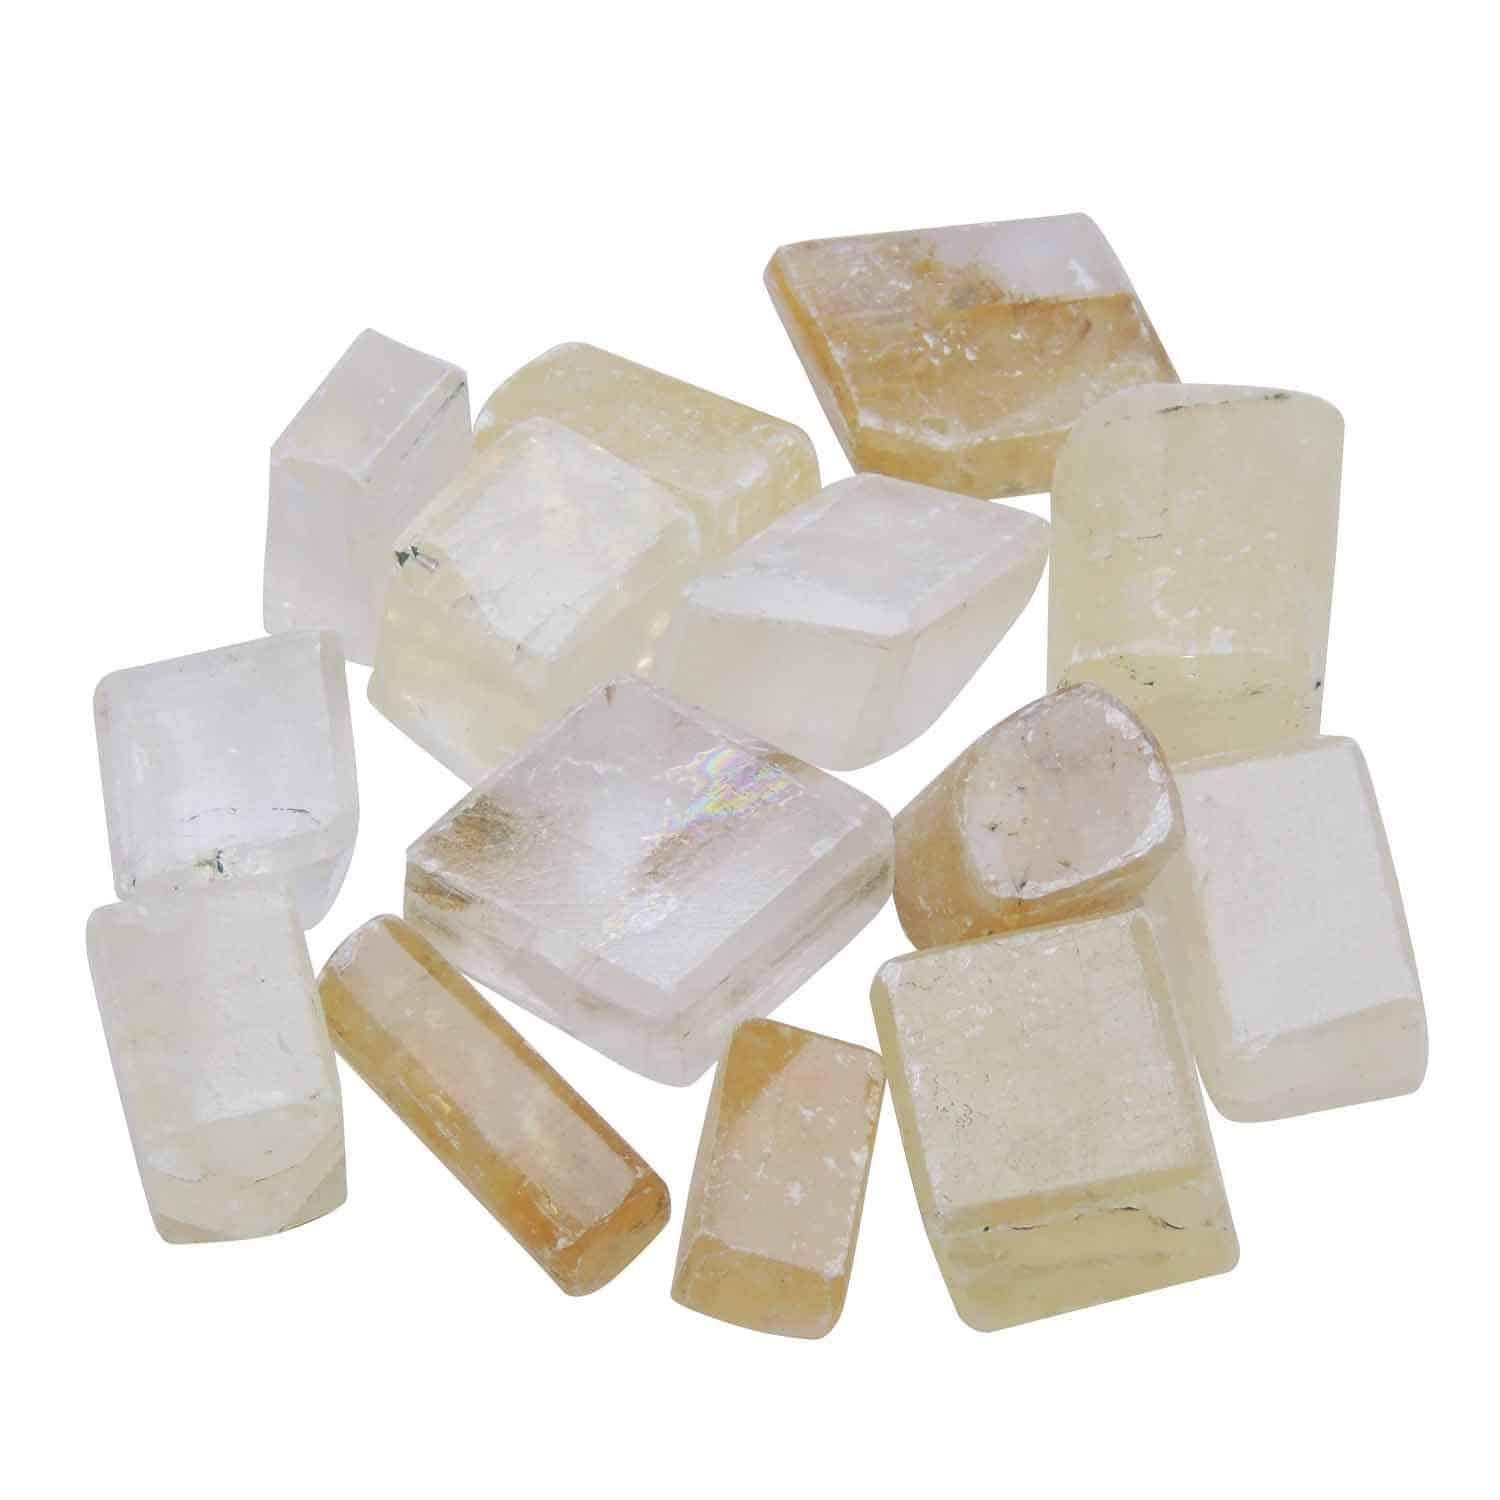 Calcite: Magical and Healing Effect, Zodiac signs, Chakras, Taking Care, Identifying Fake Calcite